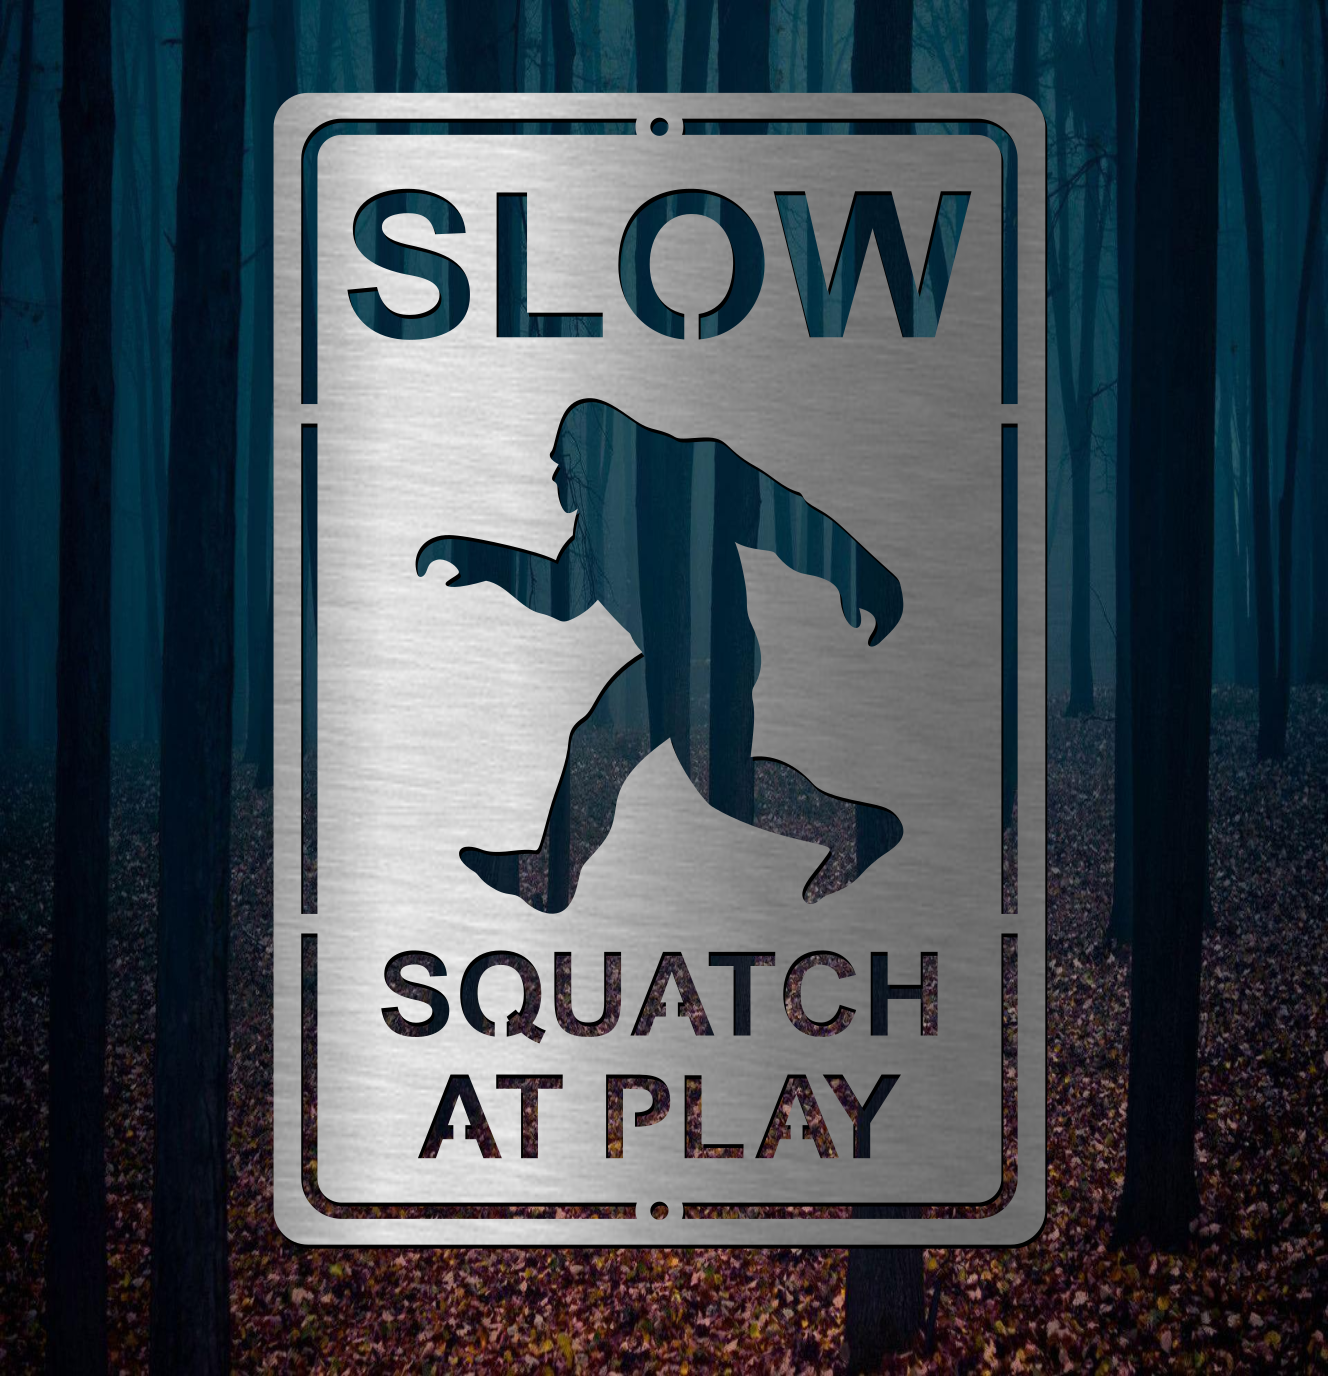 Squatch at Play